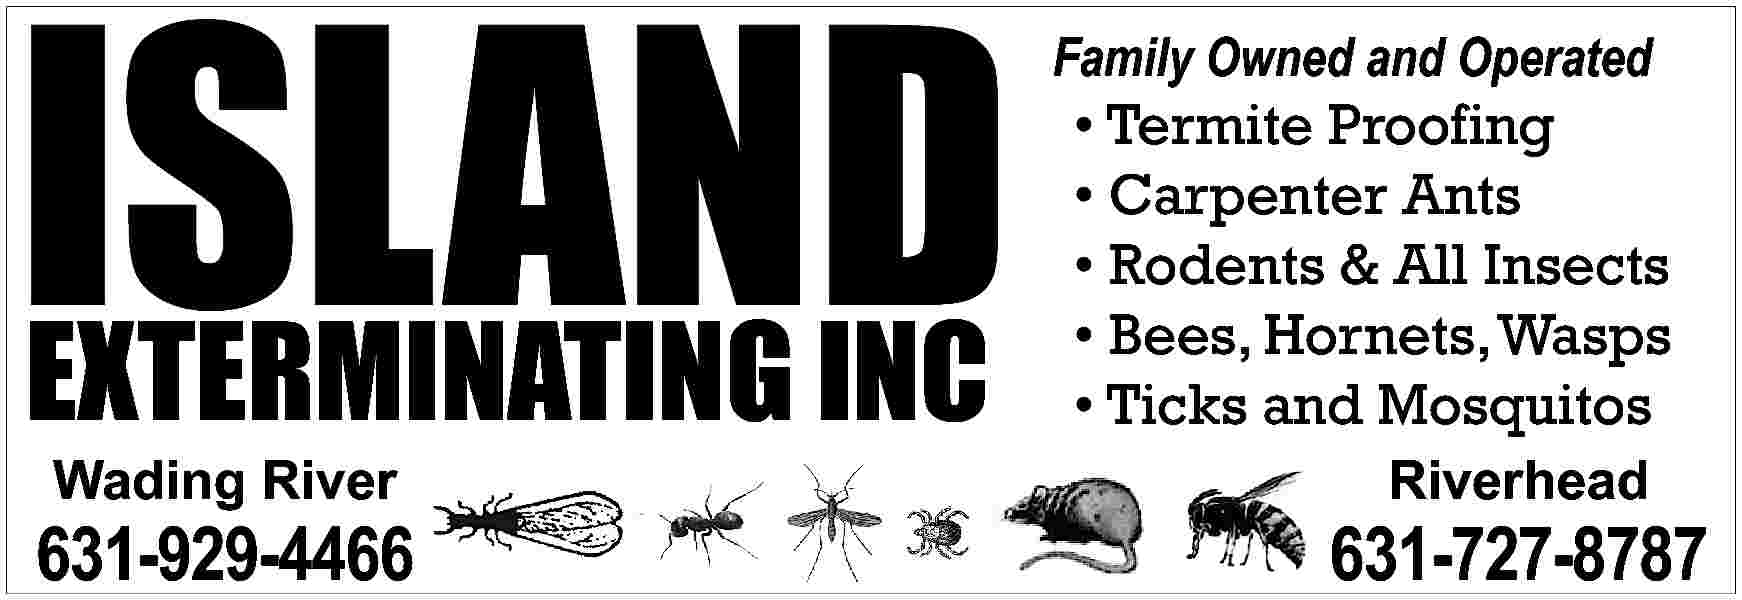 ISLAND <br>EXTERMINATING INC <br> <br>Family  ISLAND  EXTERMINATING INC    Family Owned and Operated        Termite Proofing      Carpenter Ants      Rodents & All Insects      Bees, Hornets, Wasps      Ticks and Mosquitos    Wading River    Riverhead    631-929-4466    631-727-8787     